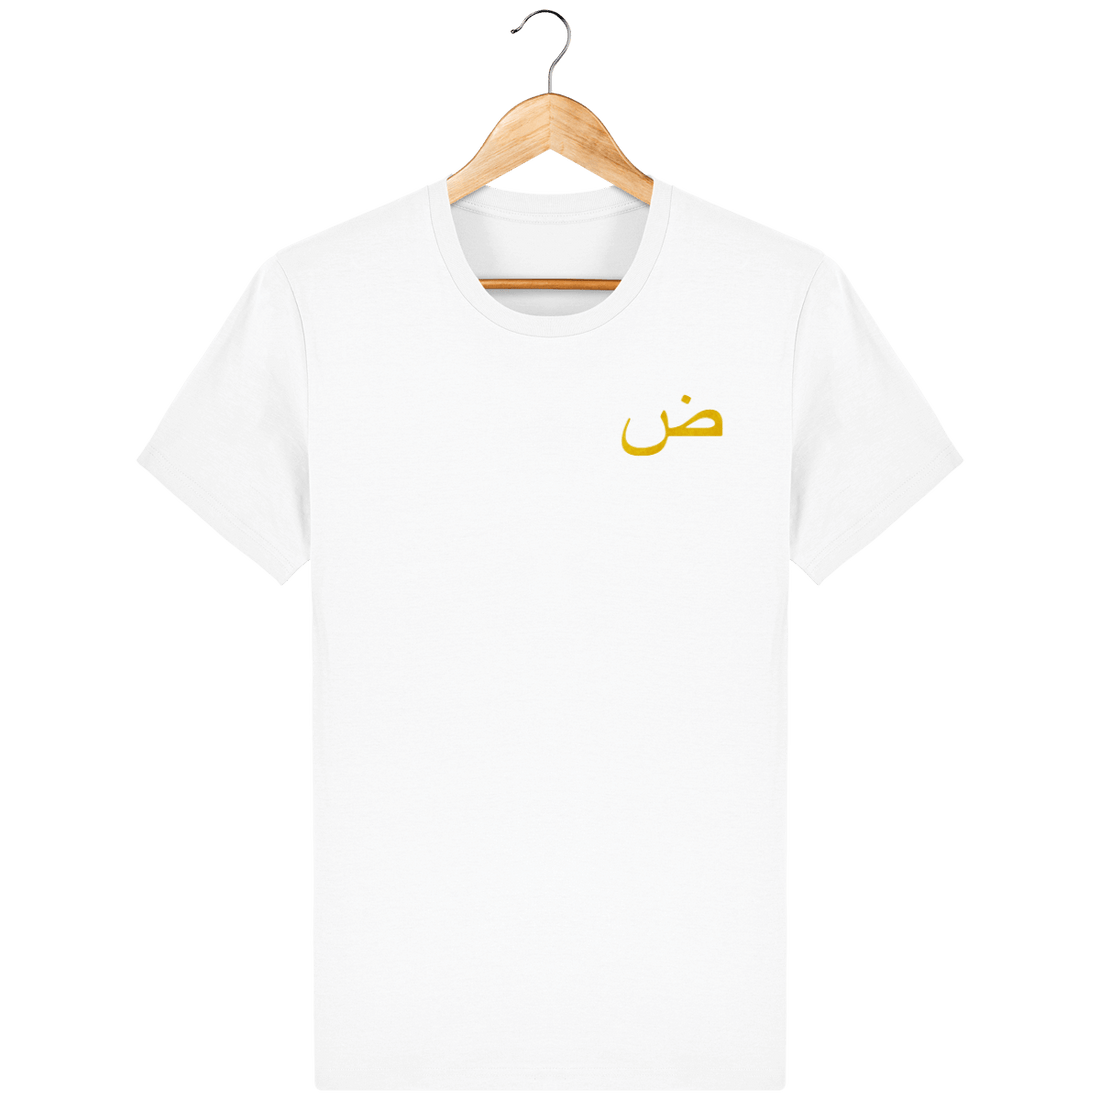 Unisexe>Tee-shirts - T-Shirt Homme <br>  Lettre Arabe Daad